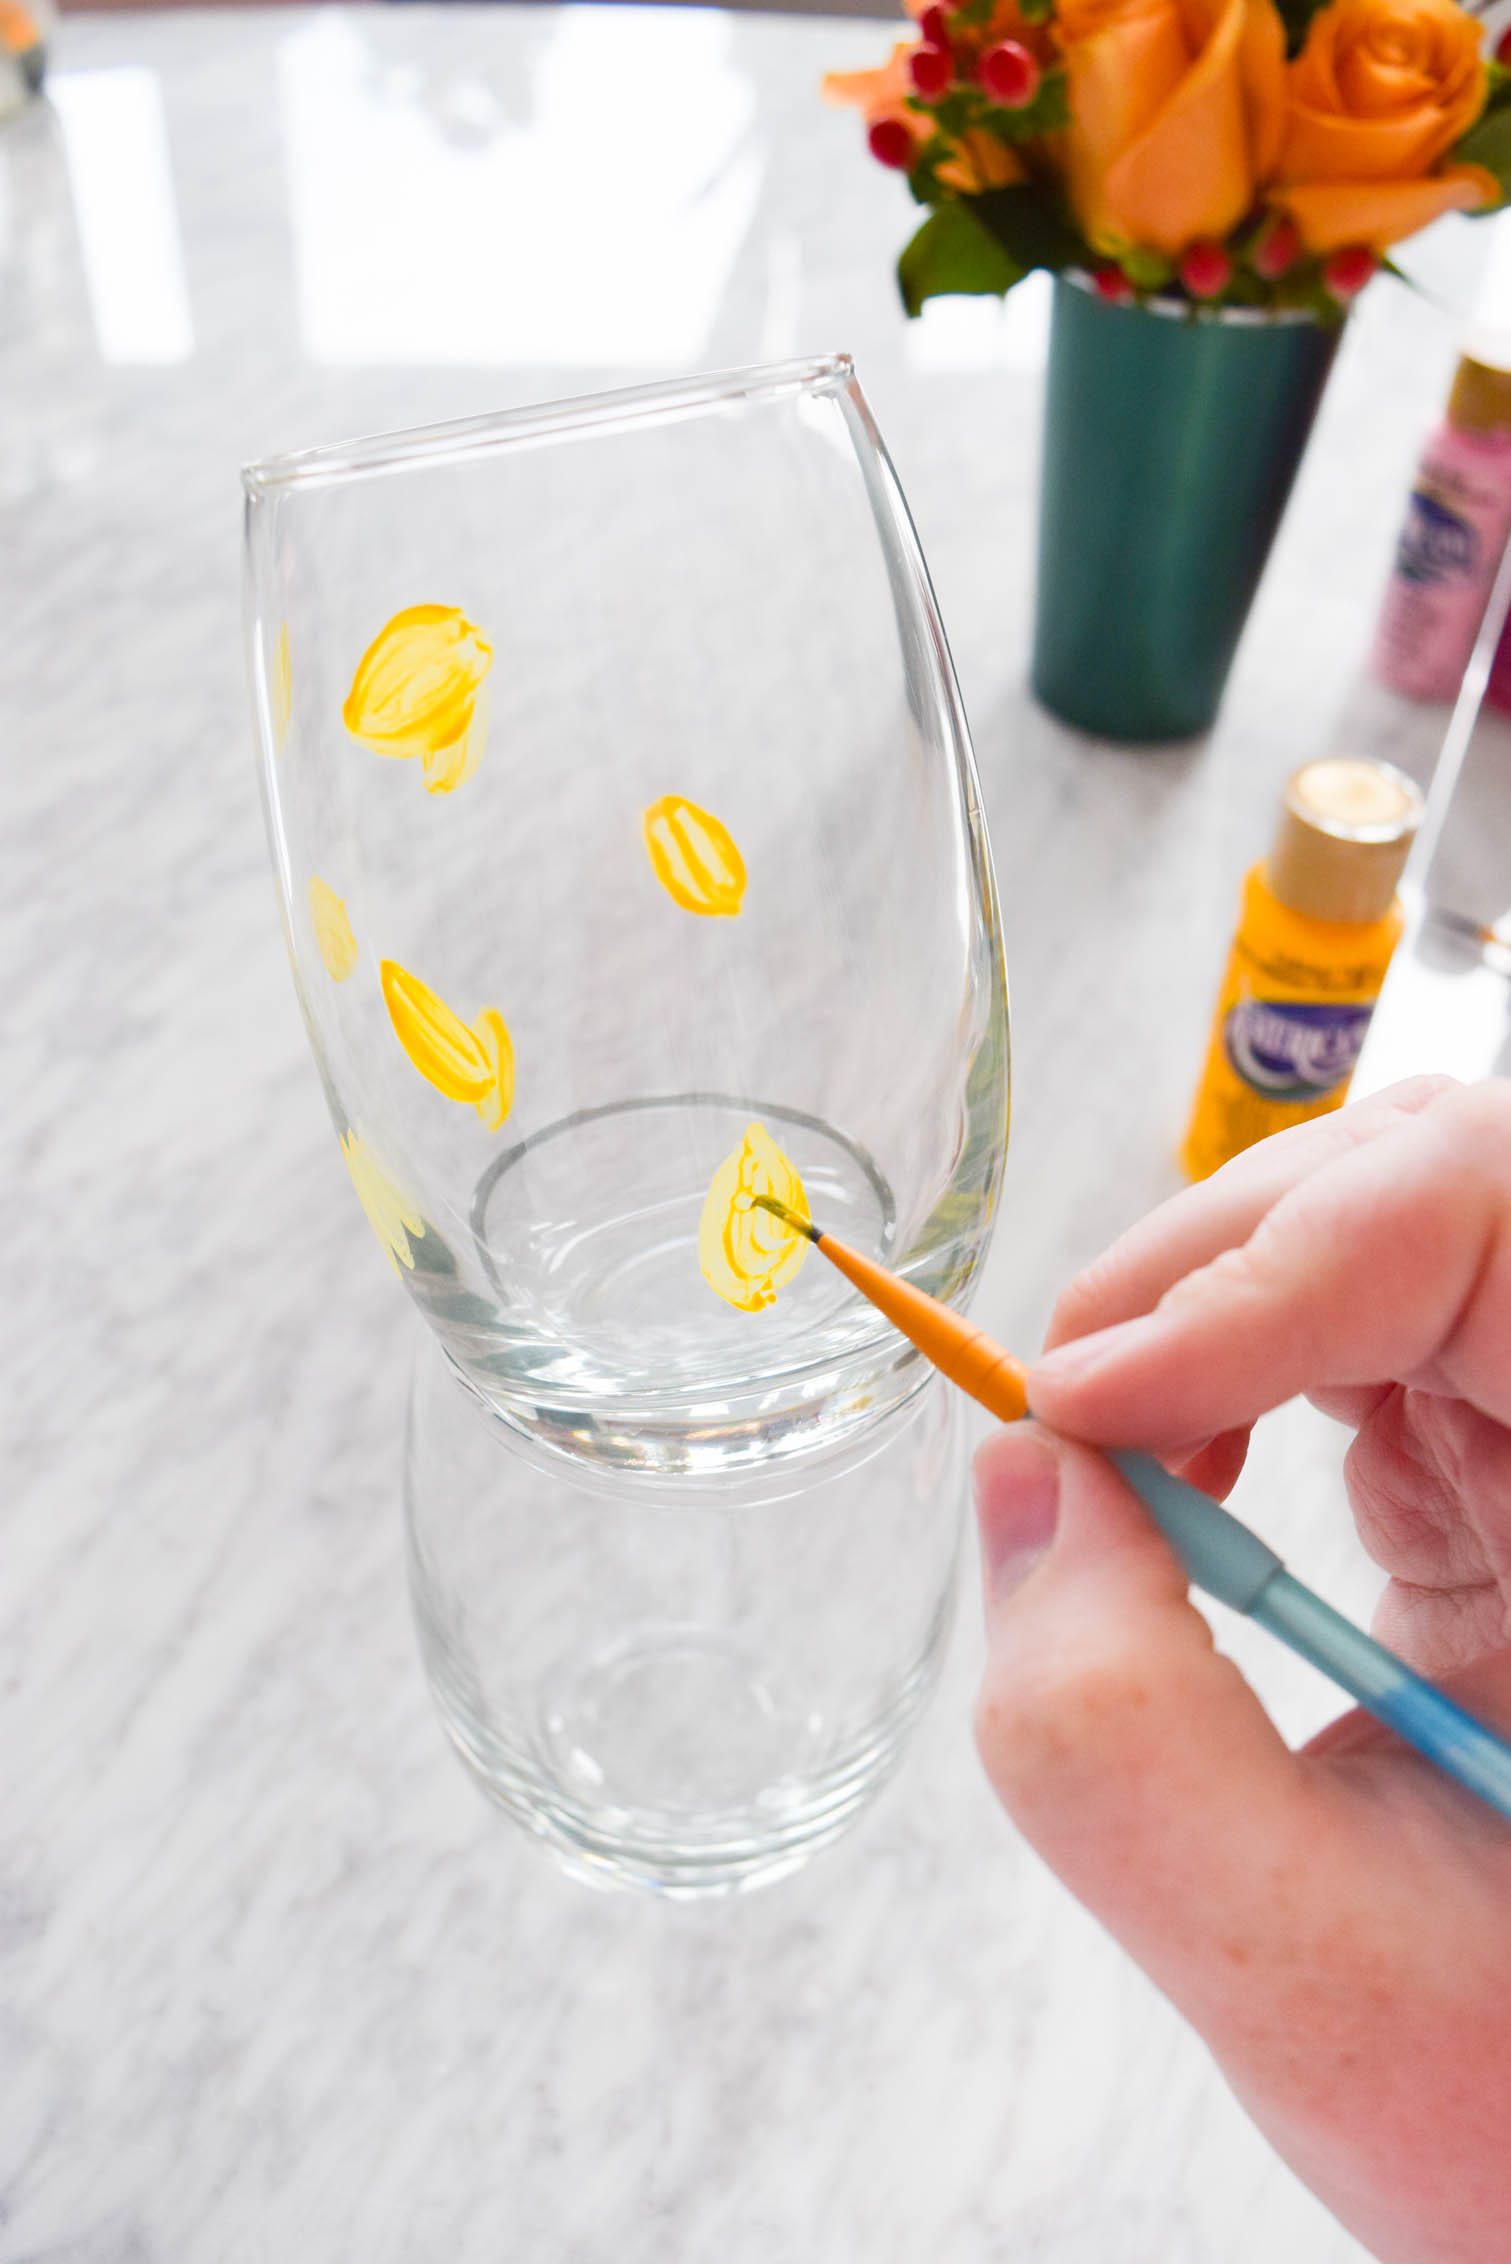 My DIY Painted Plaid & Lemon Glasses are the cutest thing you'll see all day. You can make your own summer drinkware with a retro and fun vibe, in just an afternoon.